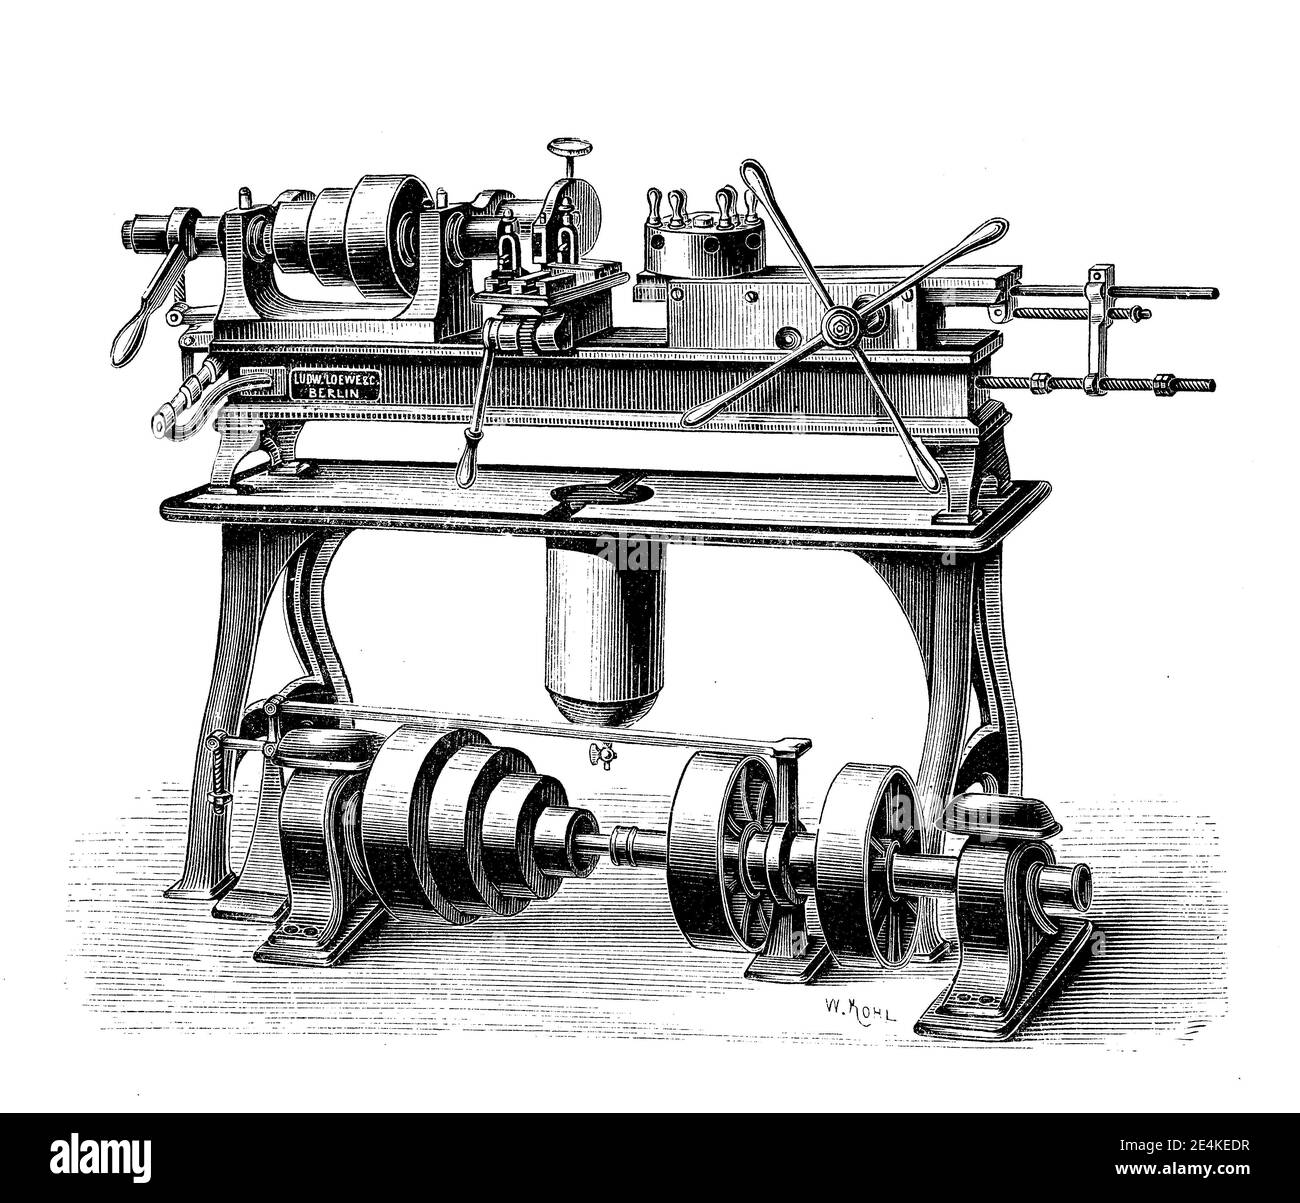 screw  machine fitted with a tapping head allowing a more automated tapping work, 19th century engraving Stock Photo